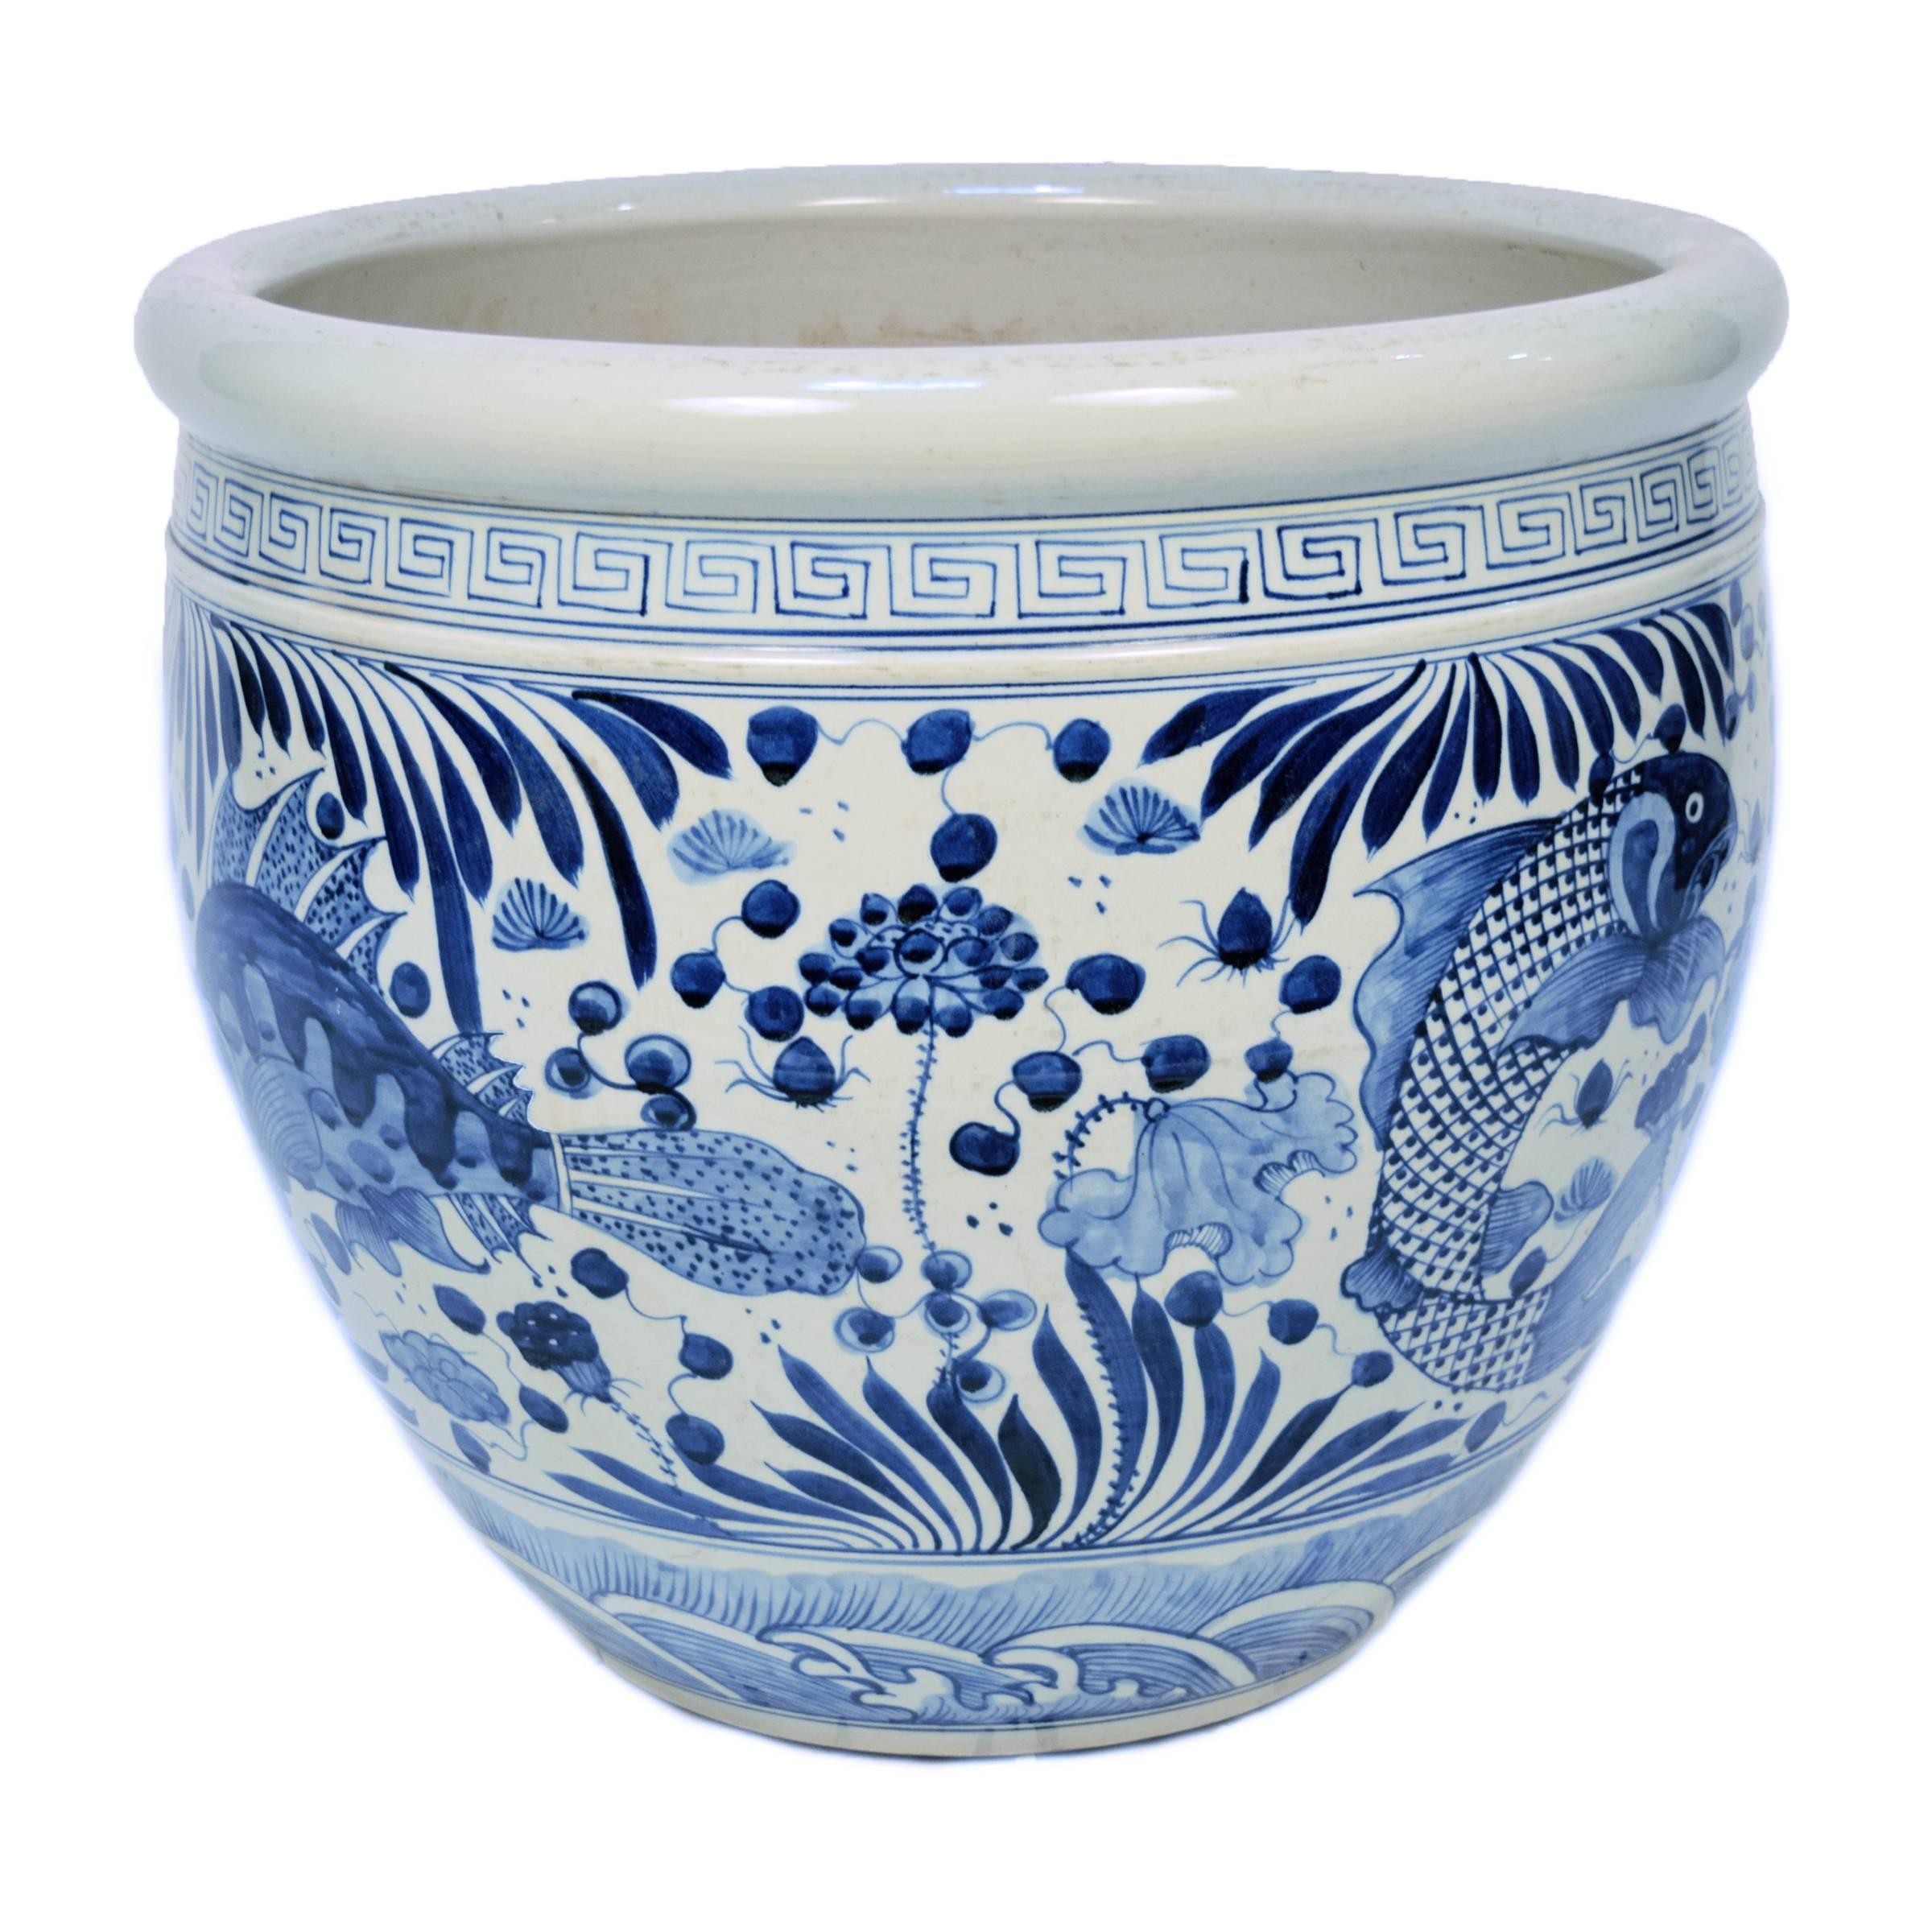 Revered for centuries for its elegant designs and rich cobalt blue and pure white colors, traditional Chinese blue-and-white porcelain lives on in this hand-painted bowl. The painterly fish and flora of the sea are traditional symbols of prosperity